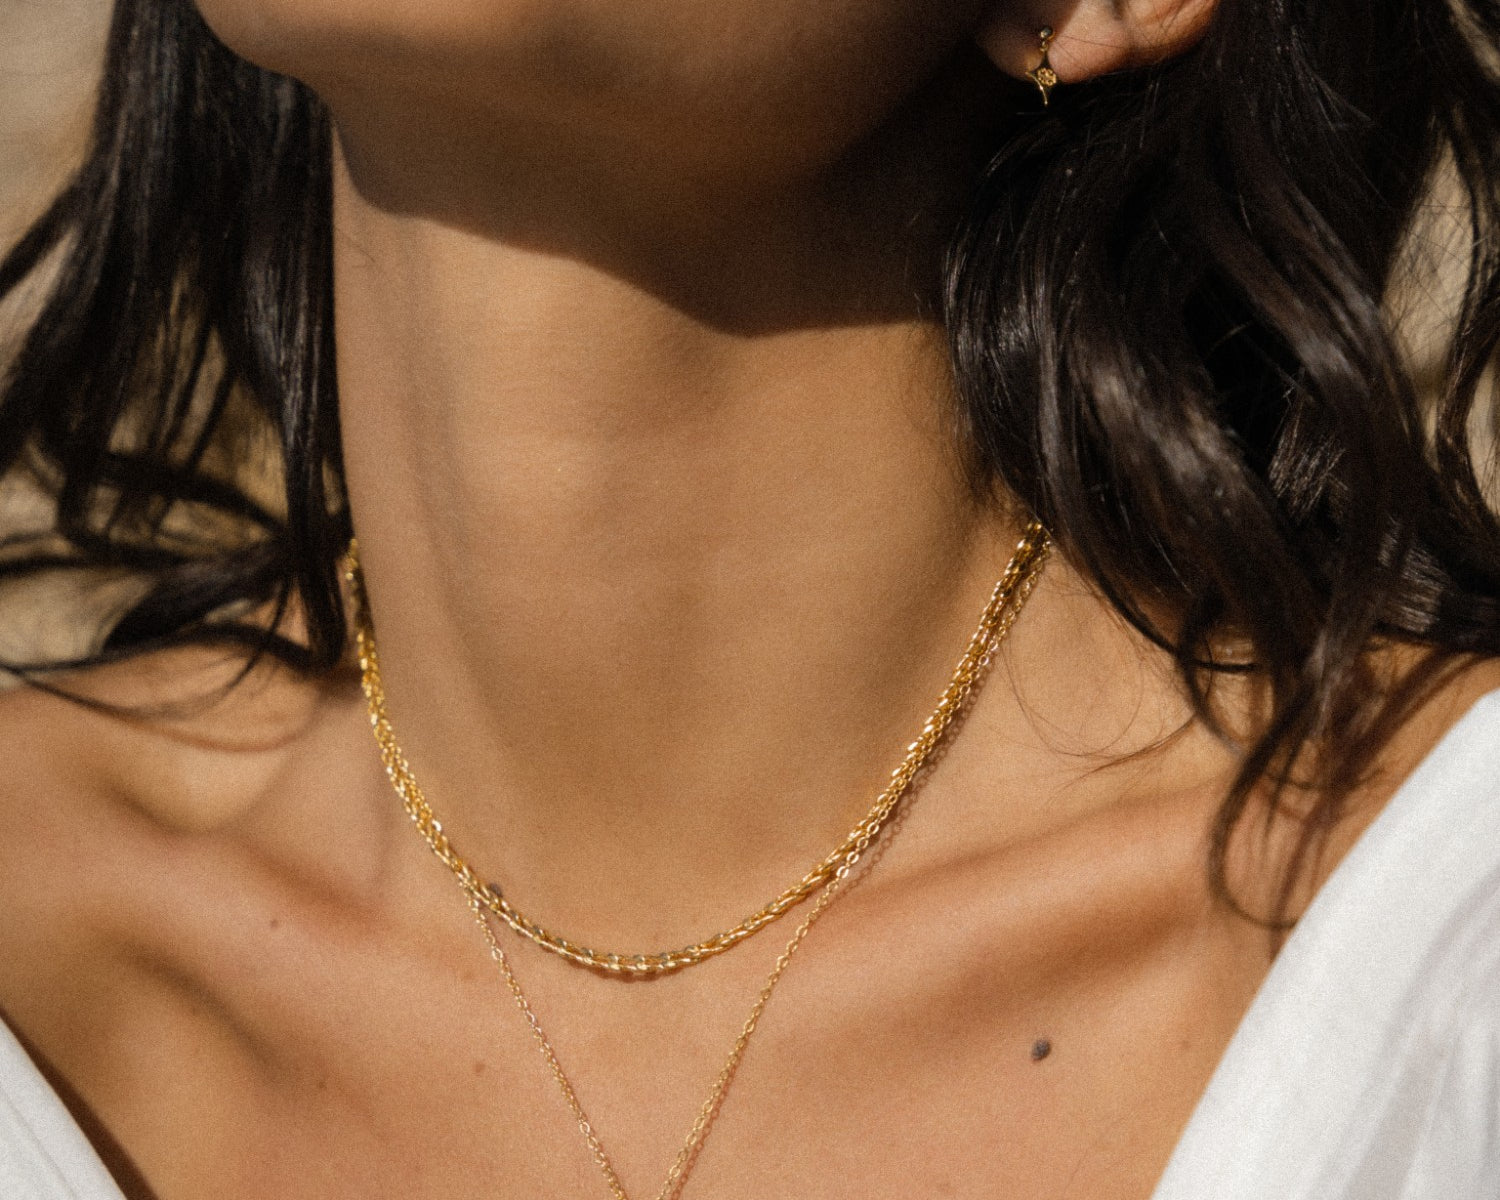 Thea Snake Chain Necklace with T-Bar | Sustainable Jewellery by Ottoman Hands